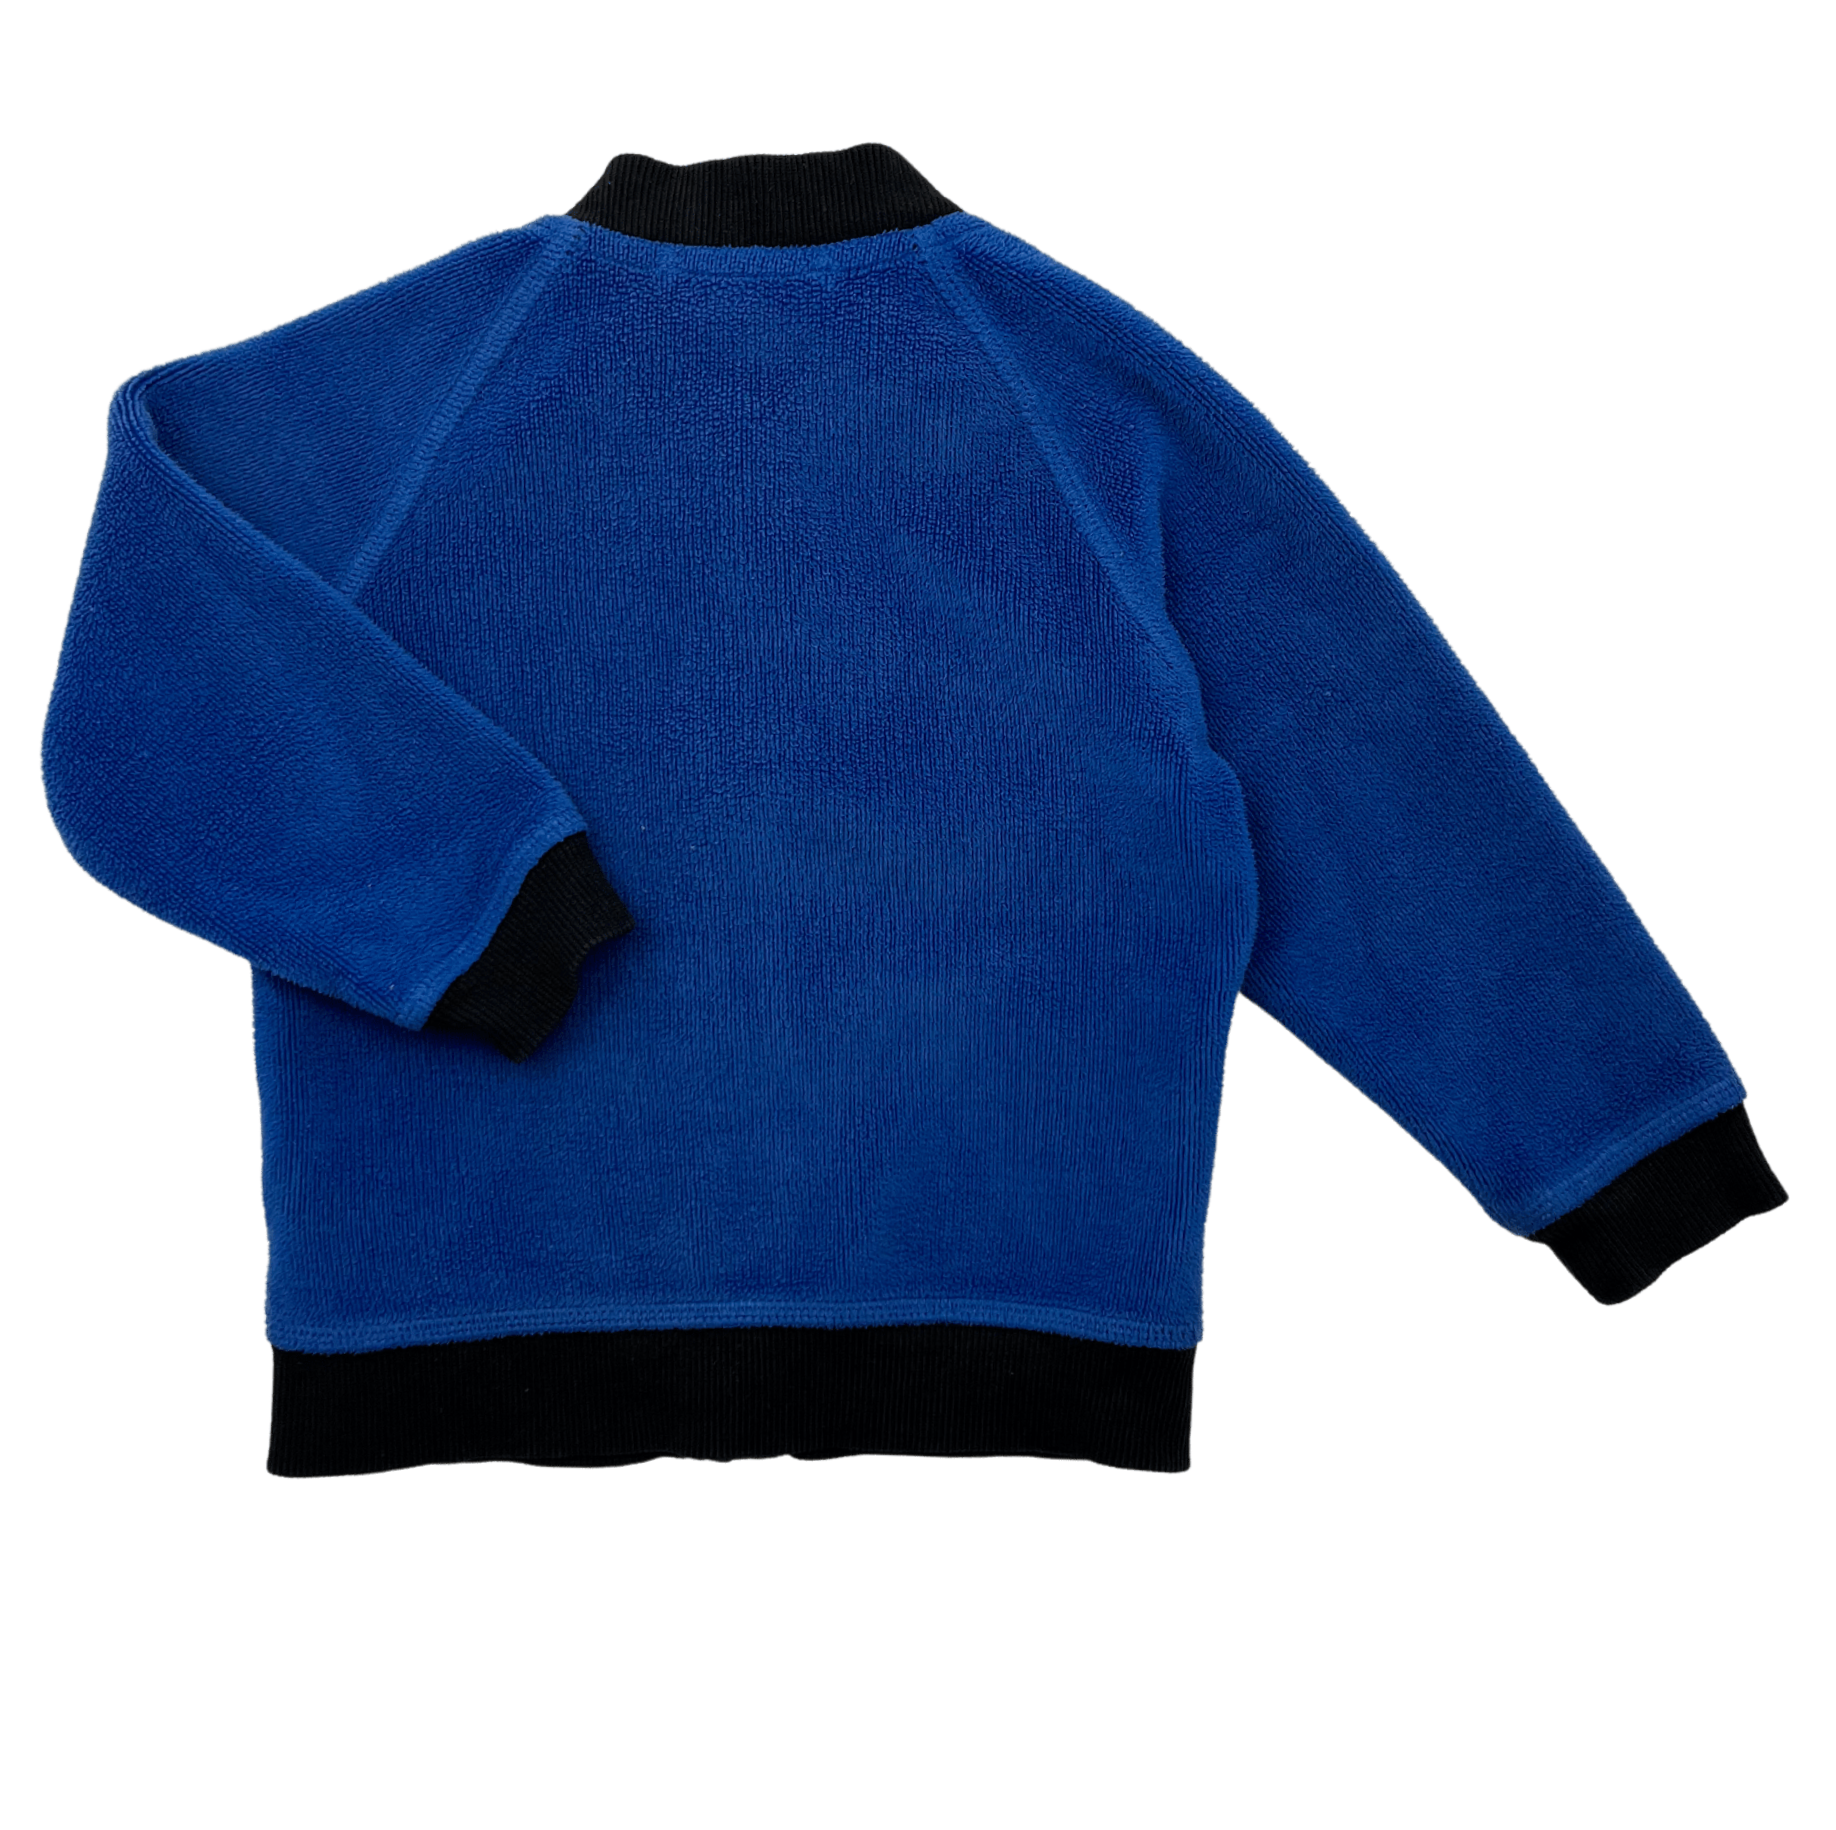 LITTLE MARC JACOBS - Sweater - 3 years old